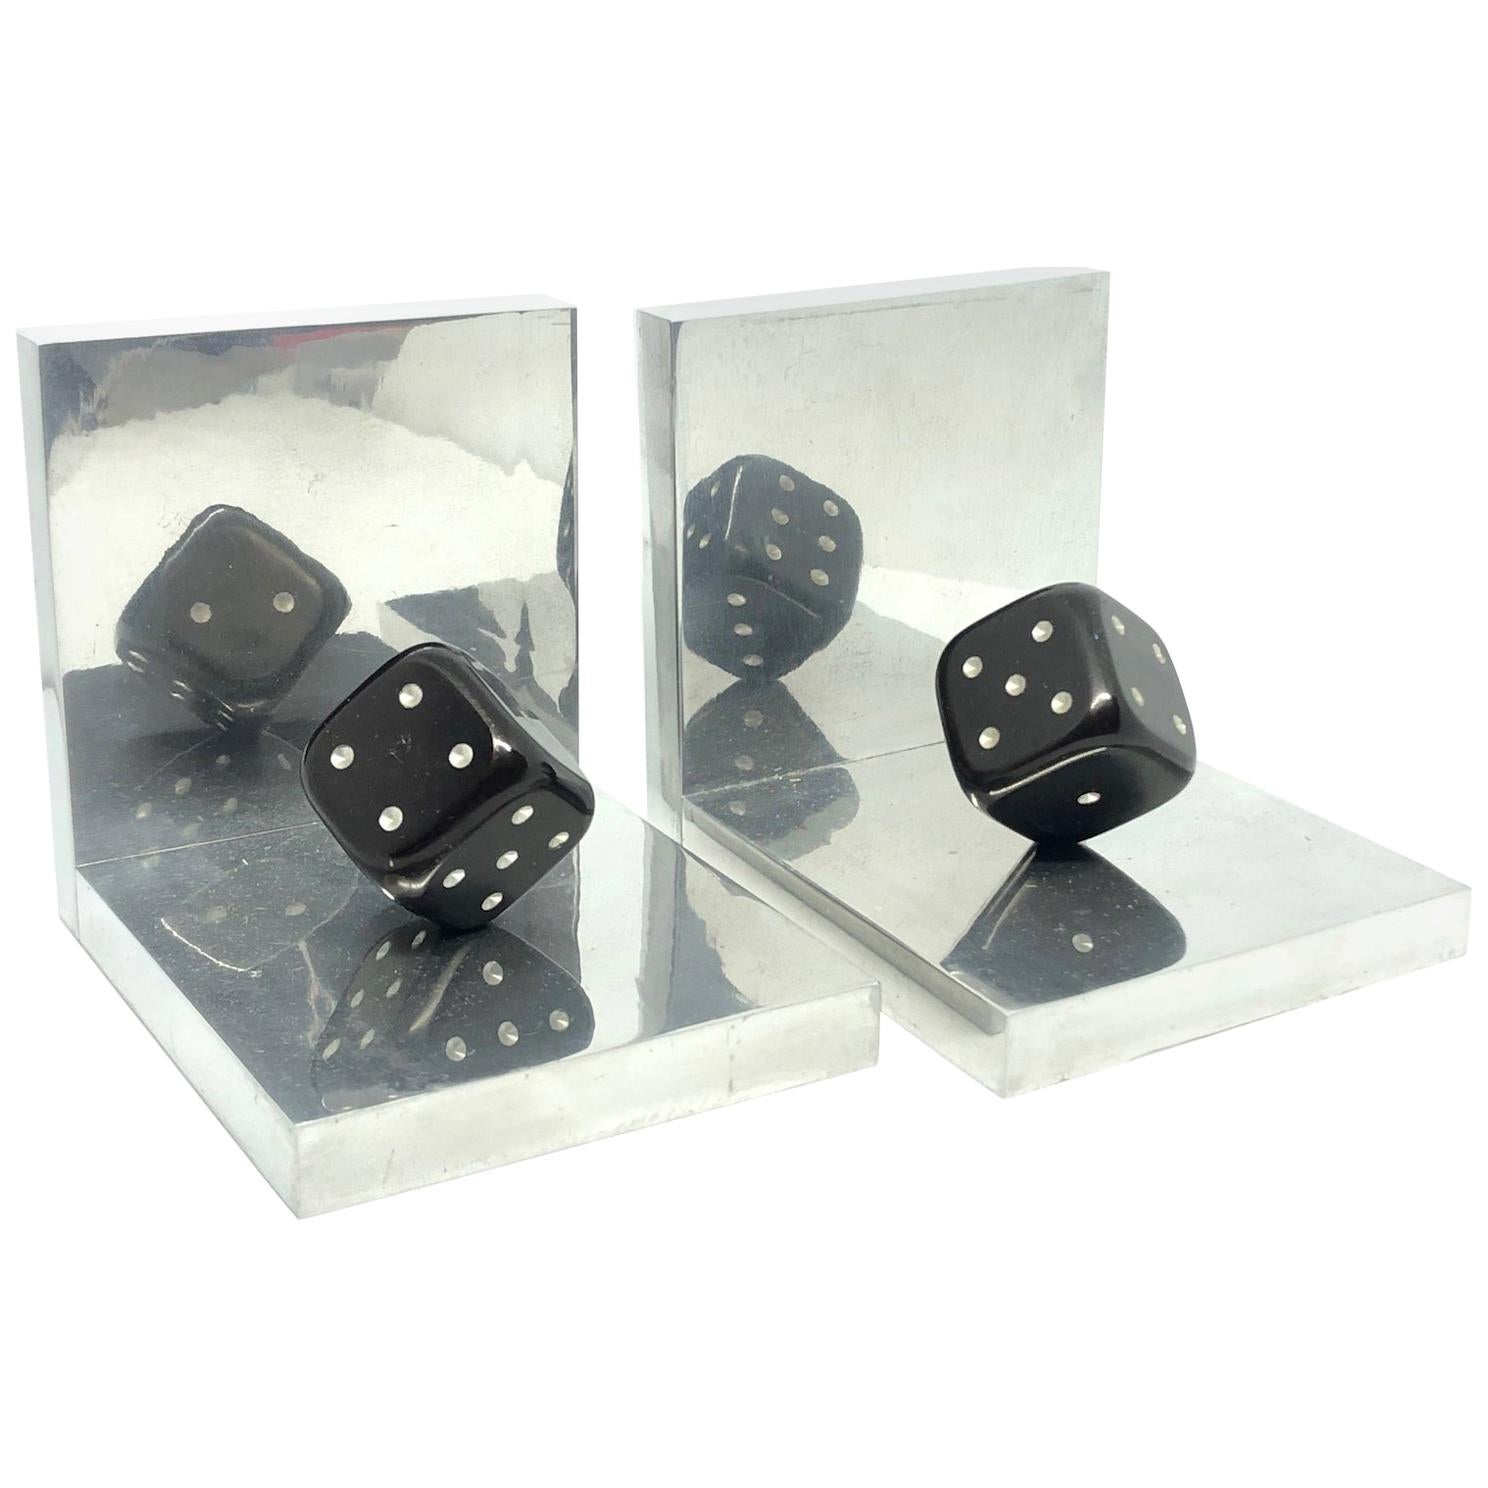 Pair of Art Deco Dice Bookends Black and Chrome Vintage German